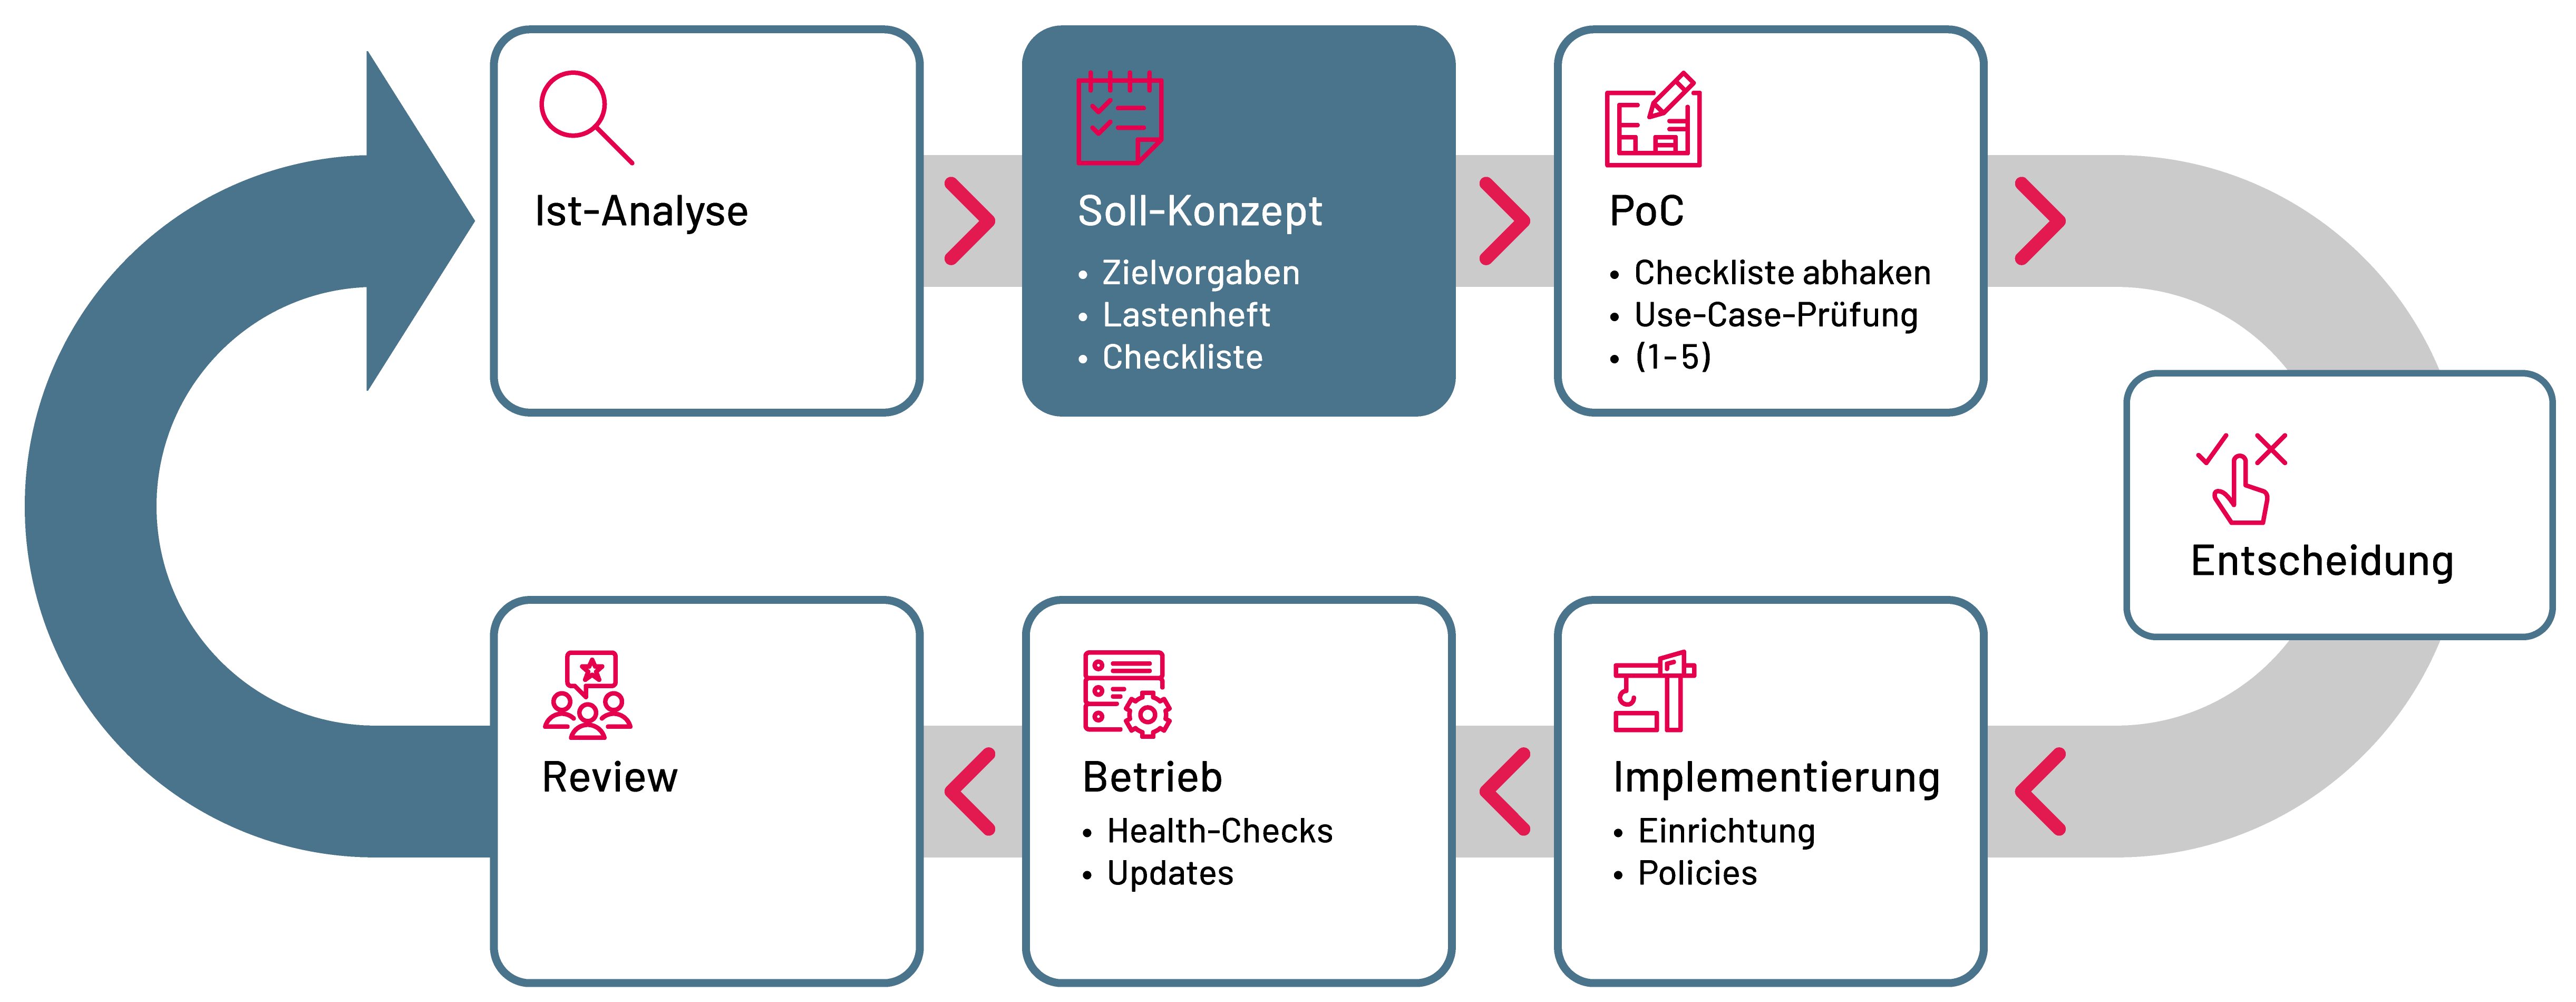 Secure Enterprise Apps - Unfied Endpoint Management Lifecycle - SYSTAG GmbH